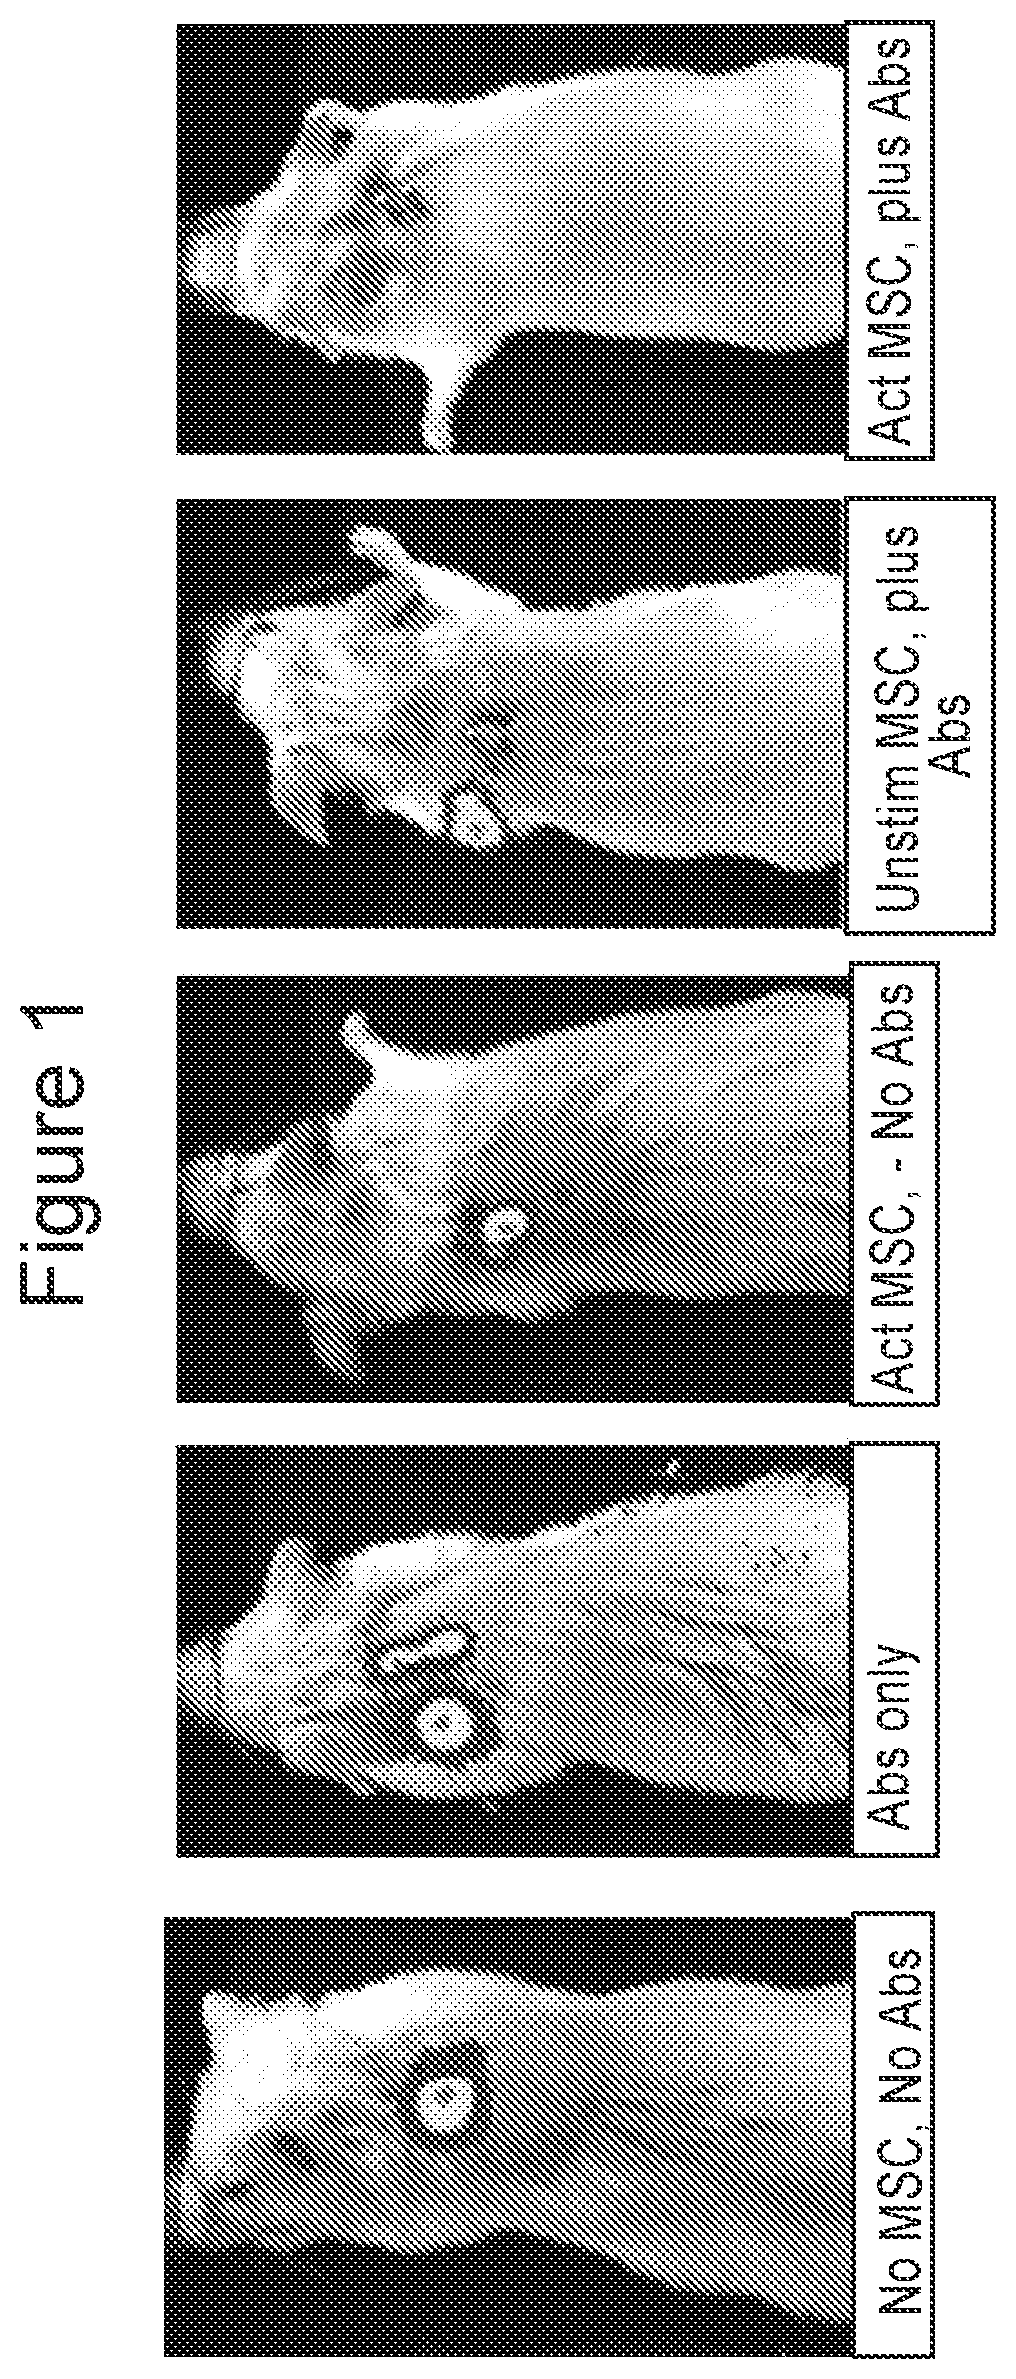 Activated stem cells and systemic treatment methods for infected wounds